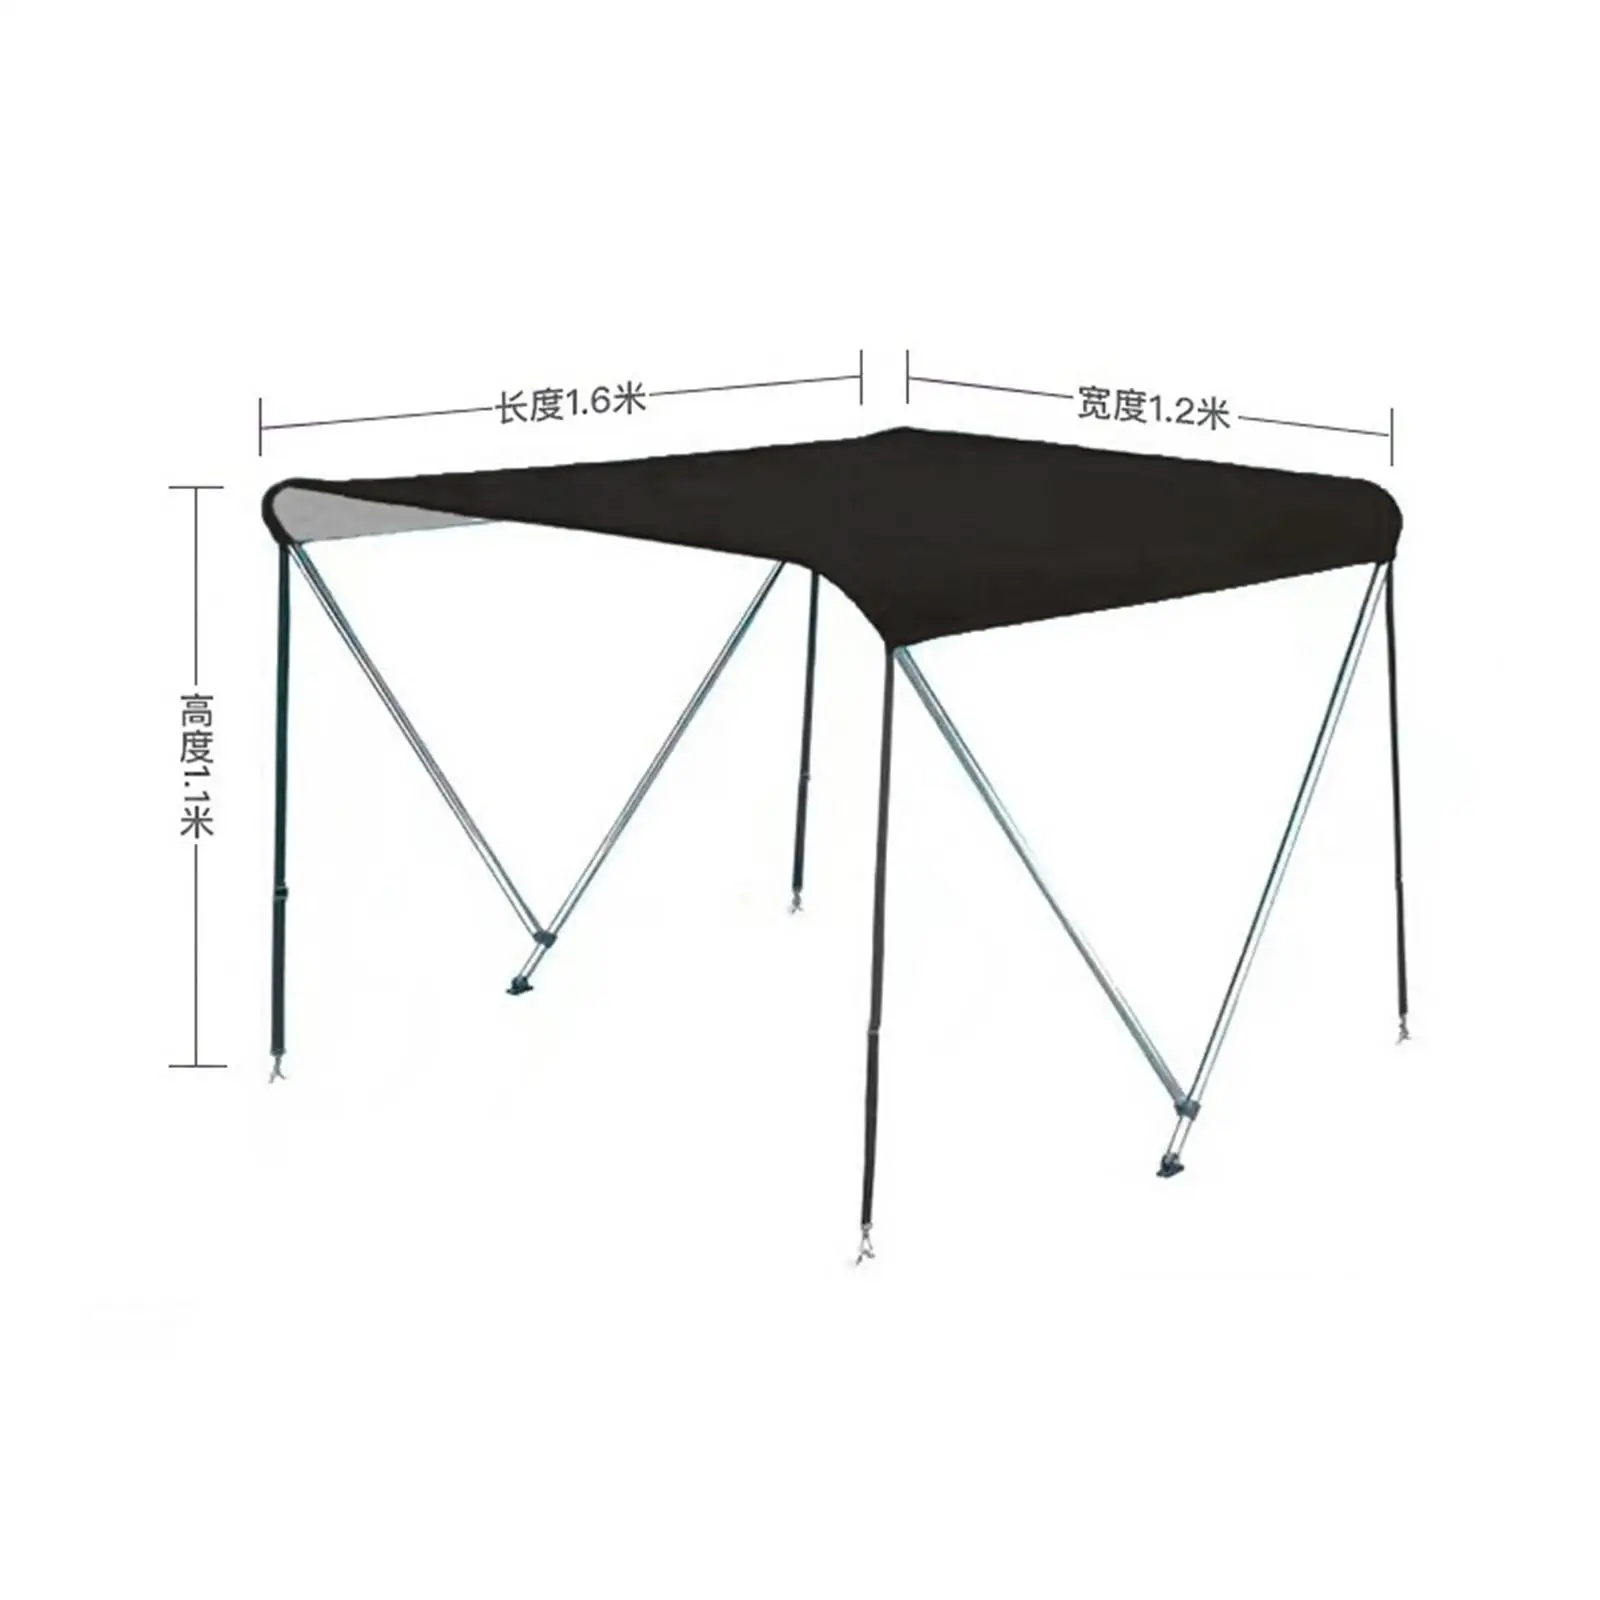 Bimini Top for Boat Sun Shelter Folding Boat Awning for Fishing Boat Sailboat Boat Canoe with A Width of 1-1.4 Meters